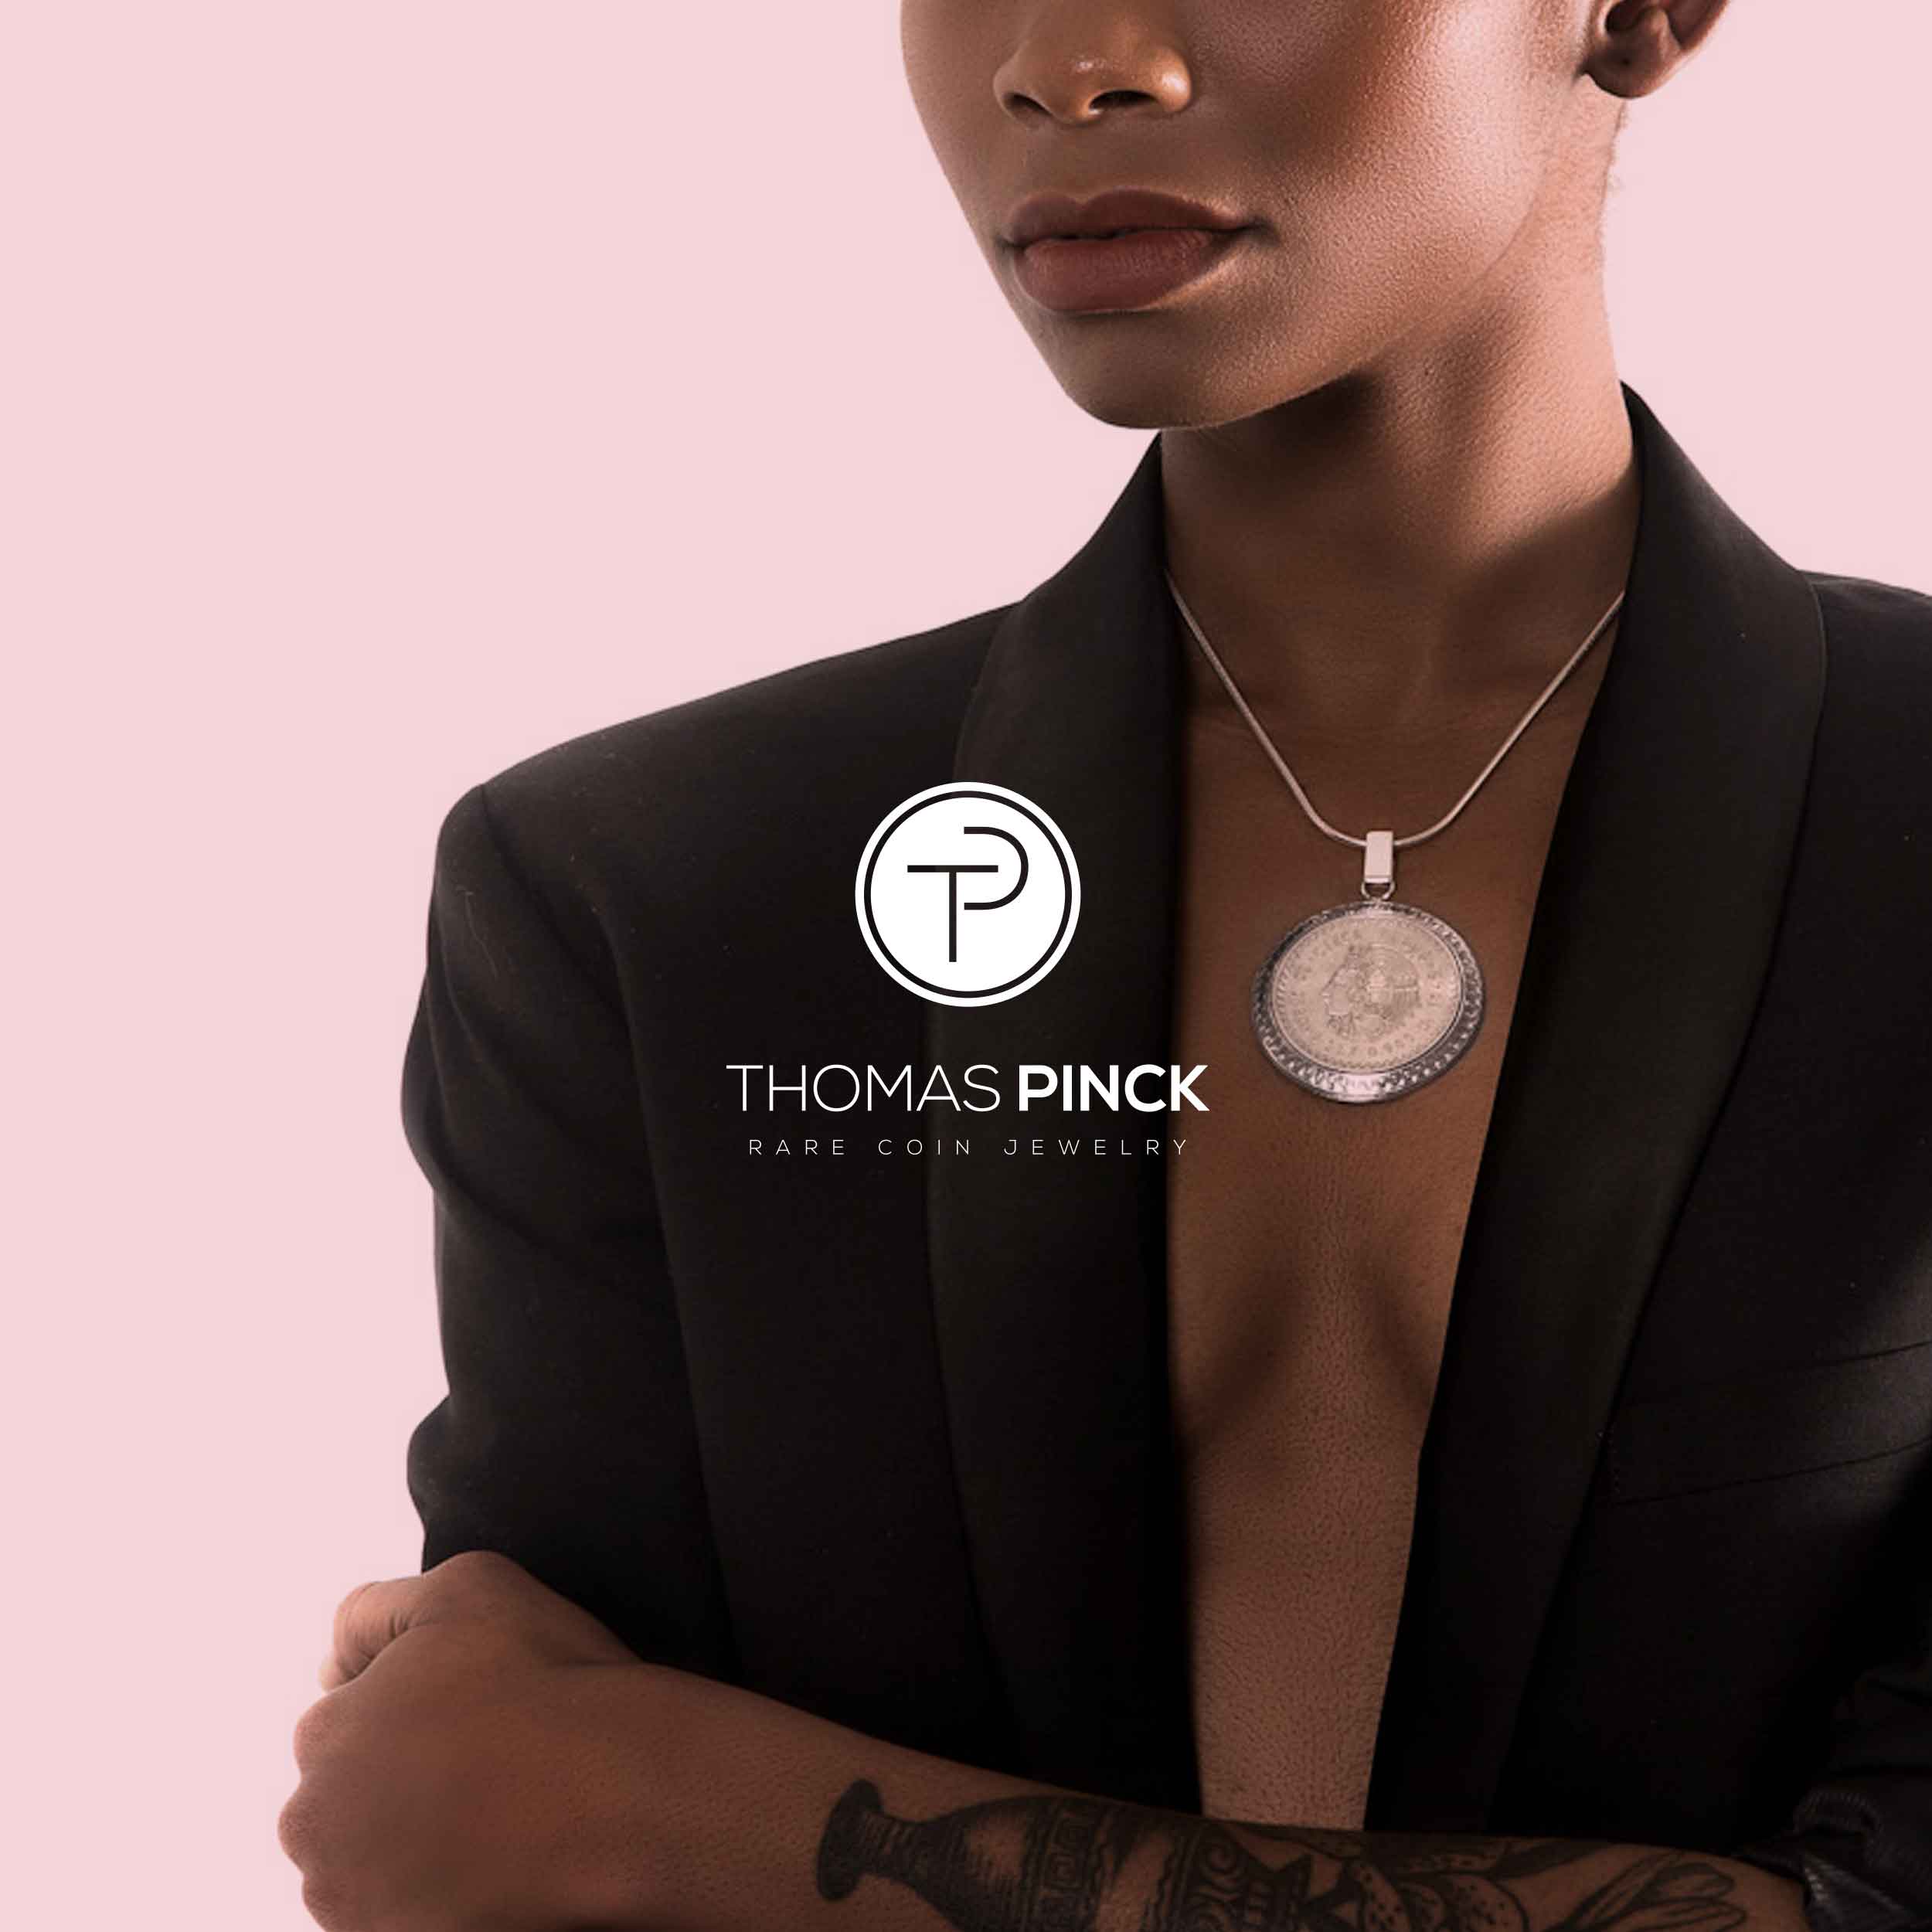 An African American model wearing a Thomas Pinck rare coin jewelry necklace. (Copy) (Copy)